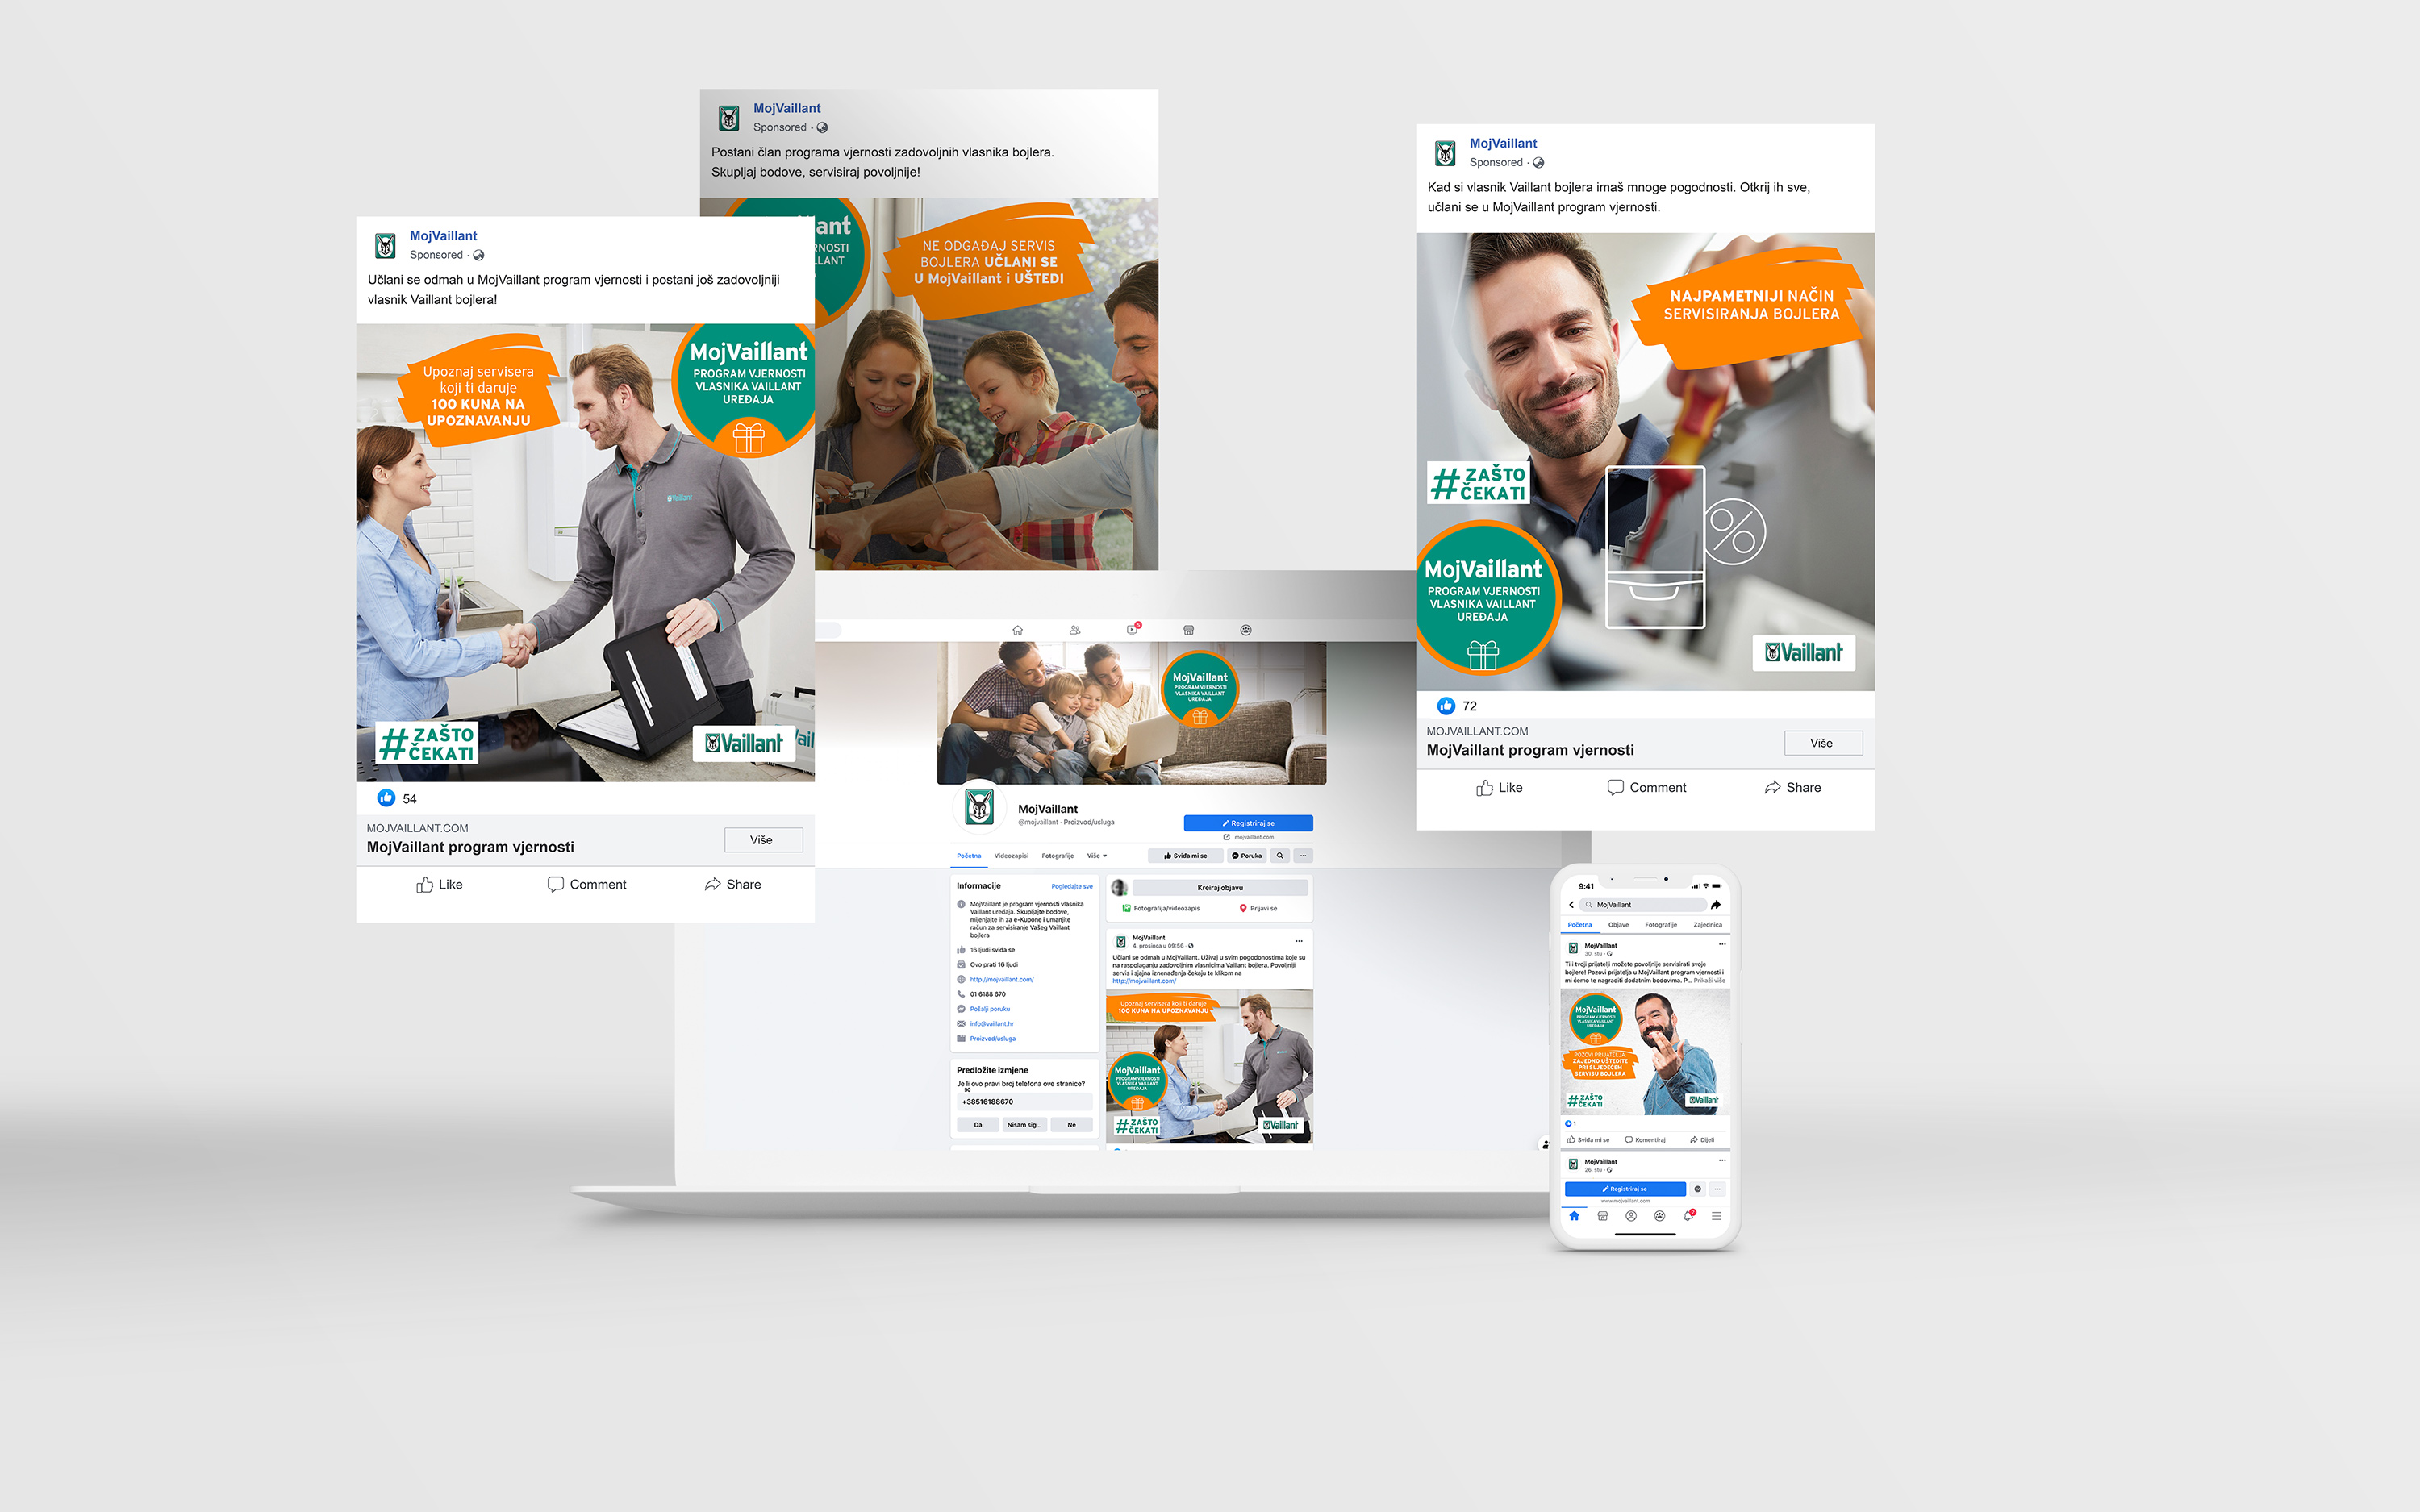 Facebook ads for MojVaillant campaign